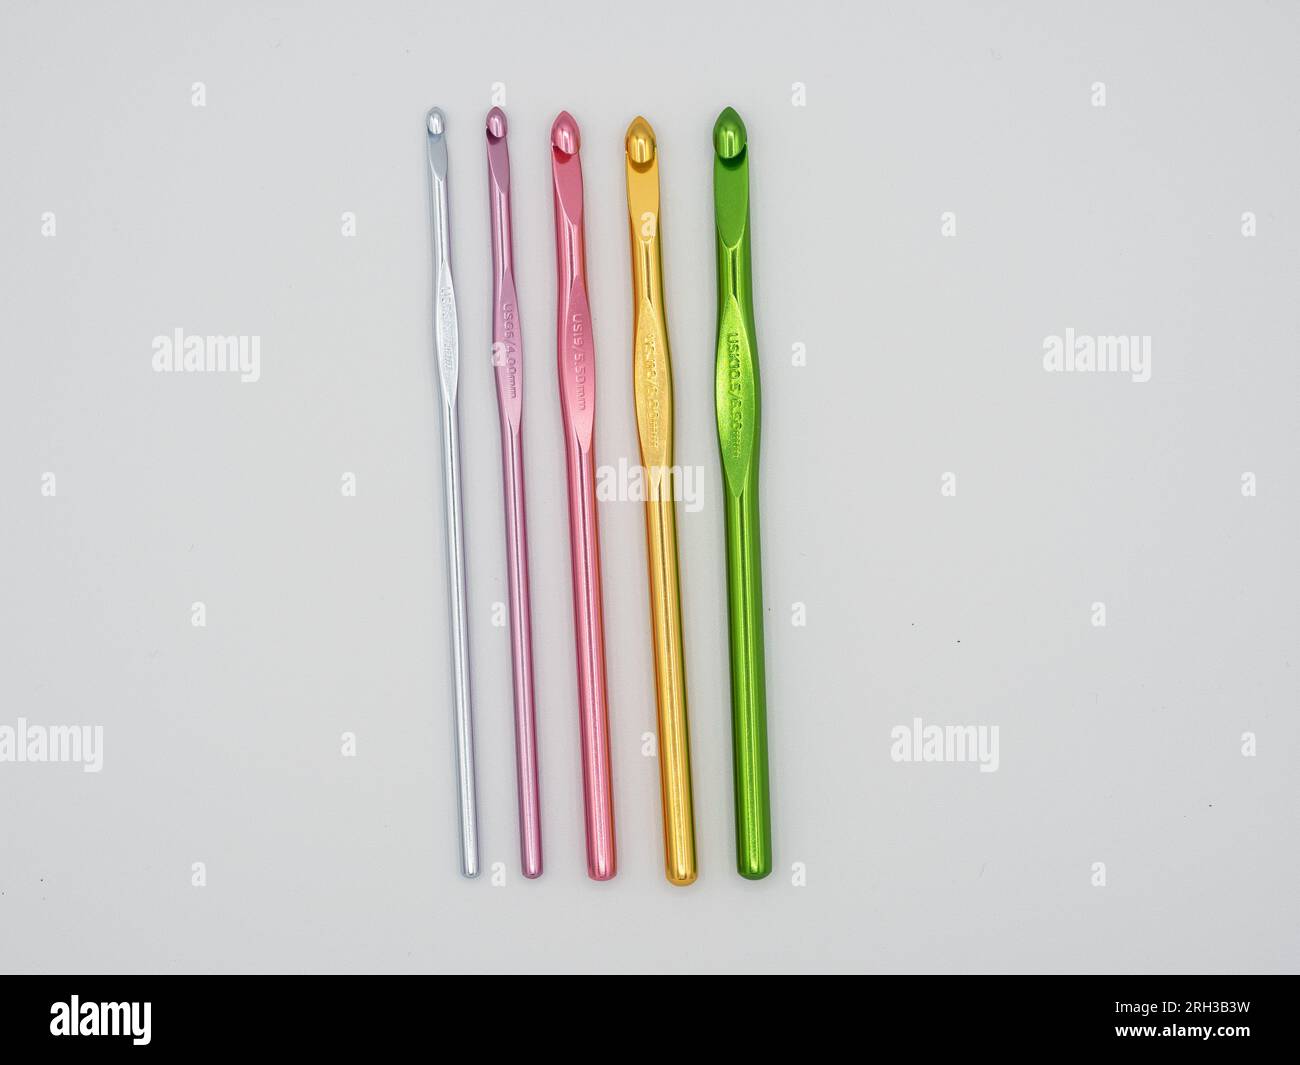 A collection of crochet hooks in different colors is isolated against a white backdrop. Stock Photo